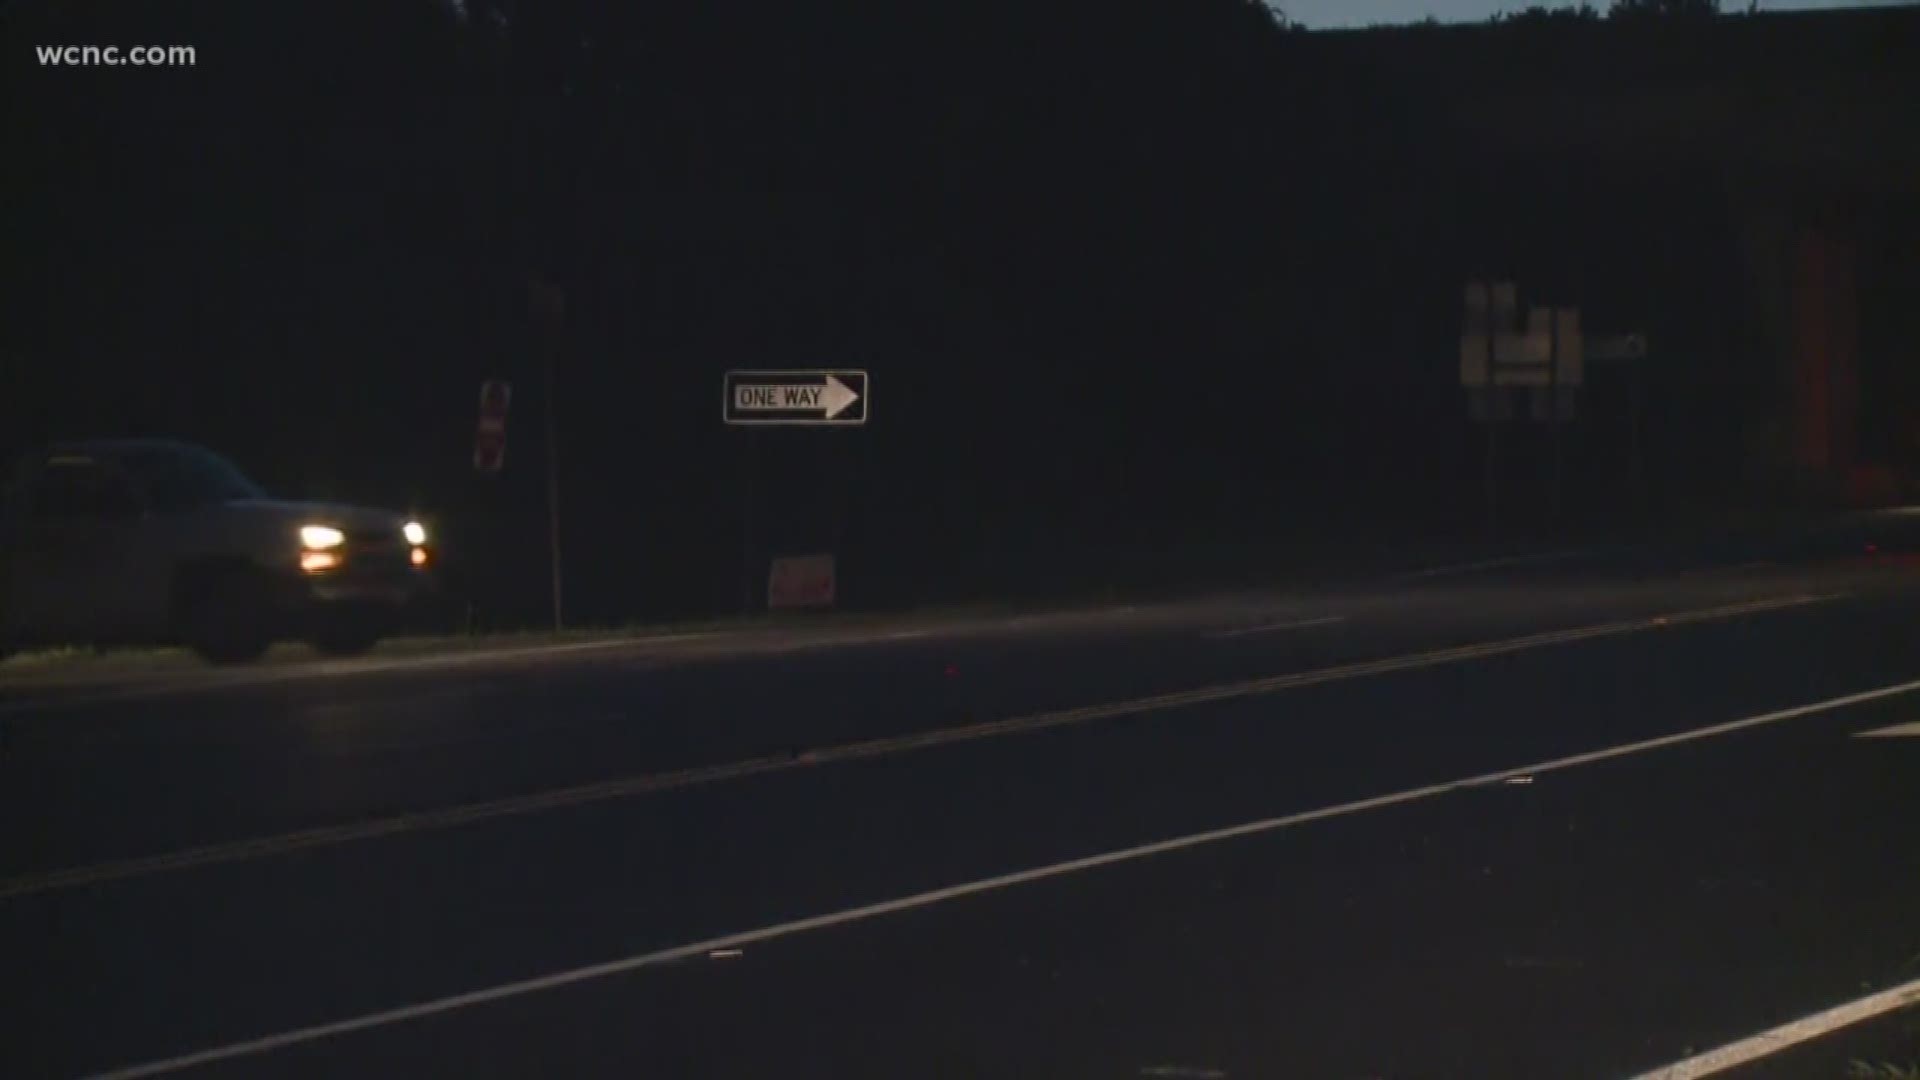 A stretch of U.S. 321 remains closed in Gaston County after powerful storms knocked down power lines Wednesday evening.